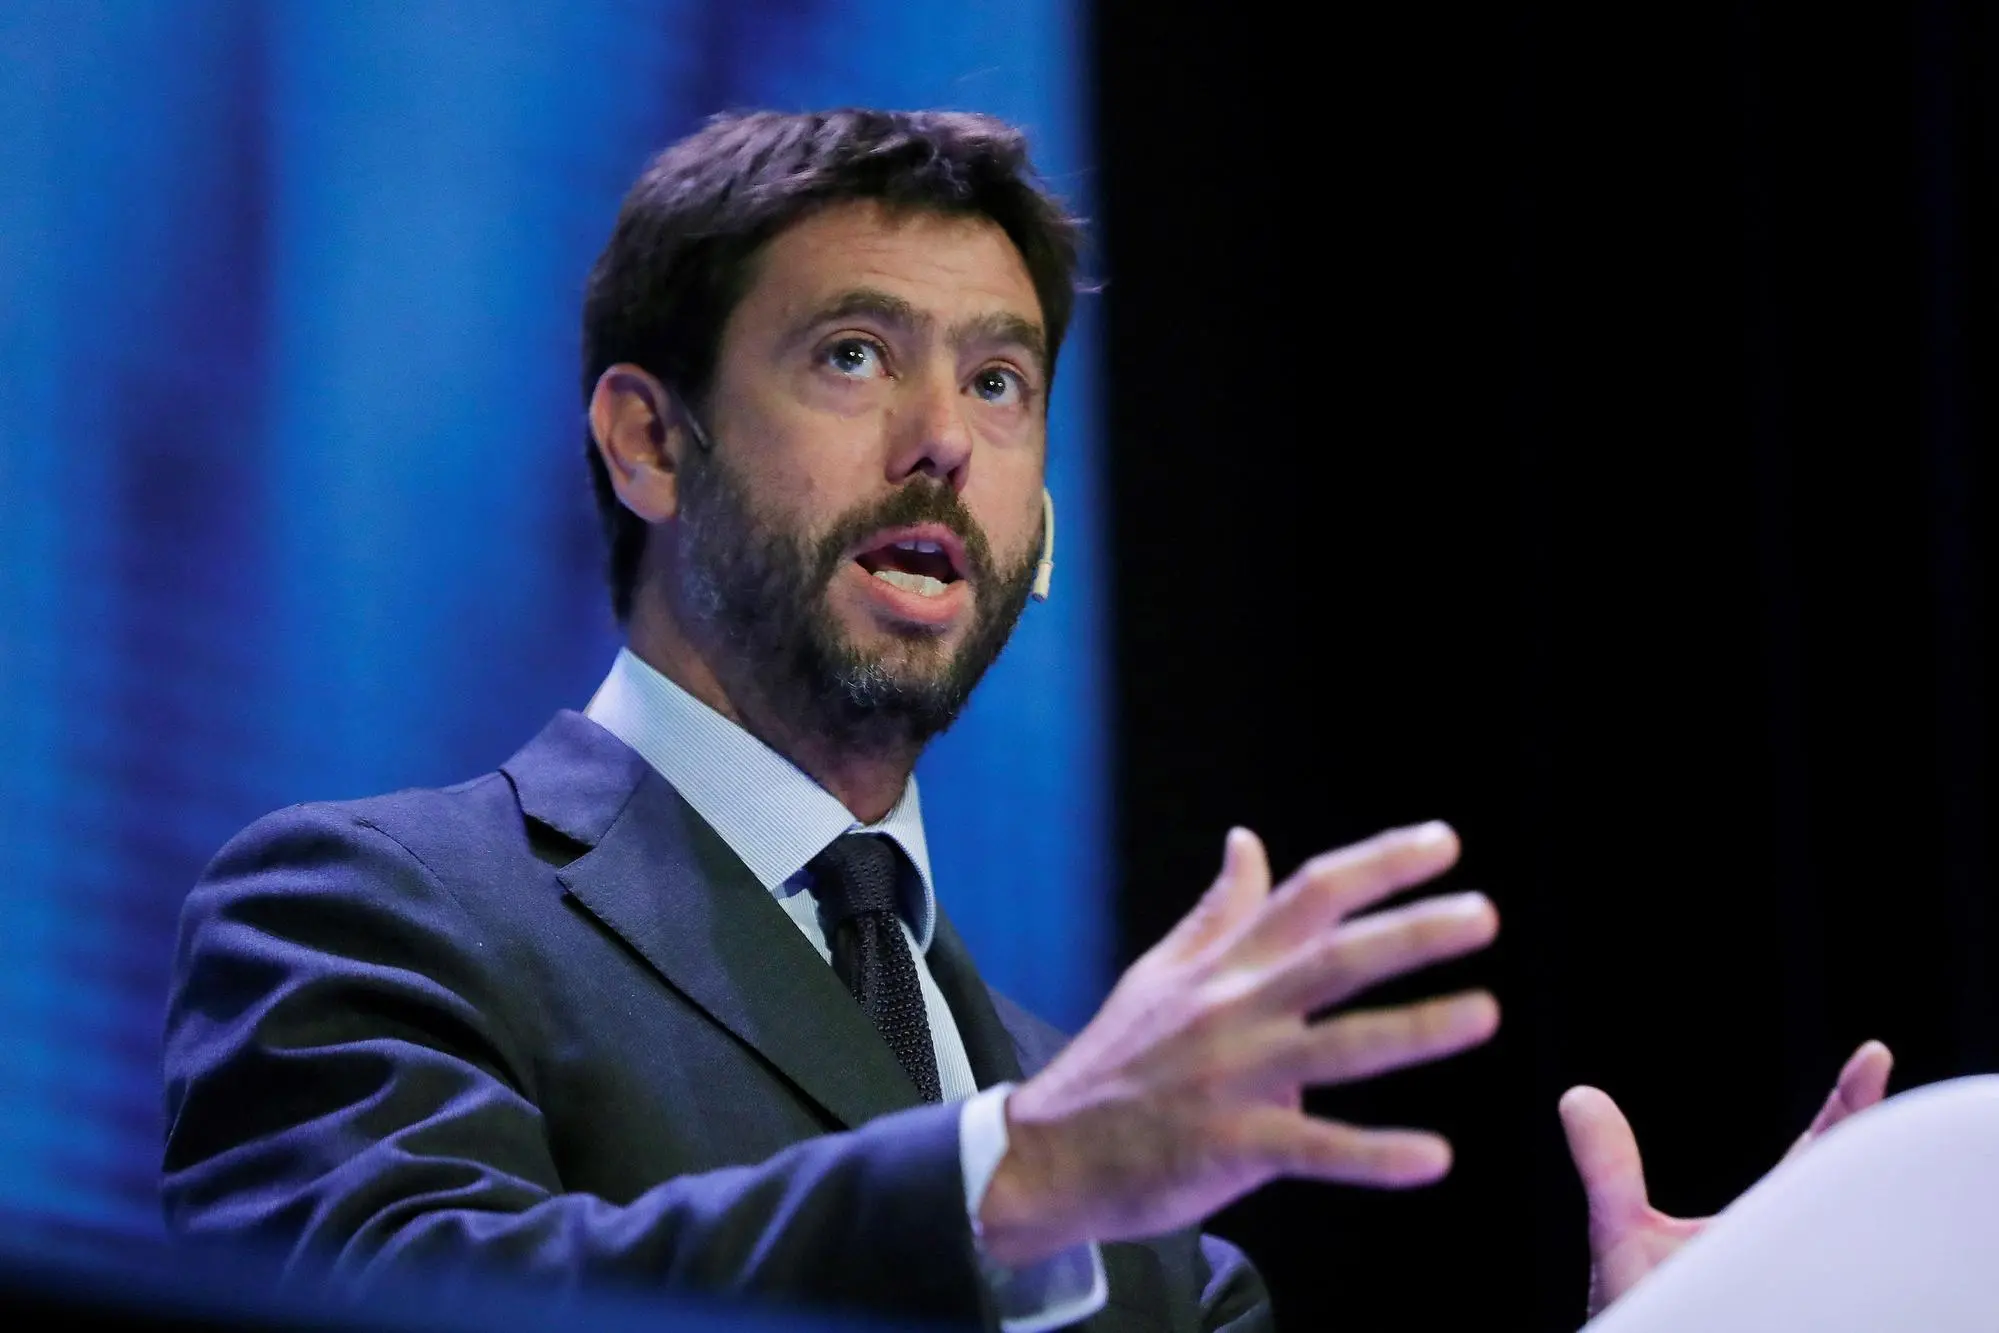 epa07042876 President of Juventus Turin, Andrea Agnelli, delivers his speech during the 3rd World Football Summit (WFS) taking place at the Teatro Goya in Madrid, Spain, 24 September 2018. The WFS will gather from 24 to 25 September influential people in the football industry aiming at discuss relevant topics and generate business opportunities. EPA/Juan Carlos Hidalgo